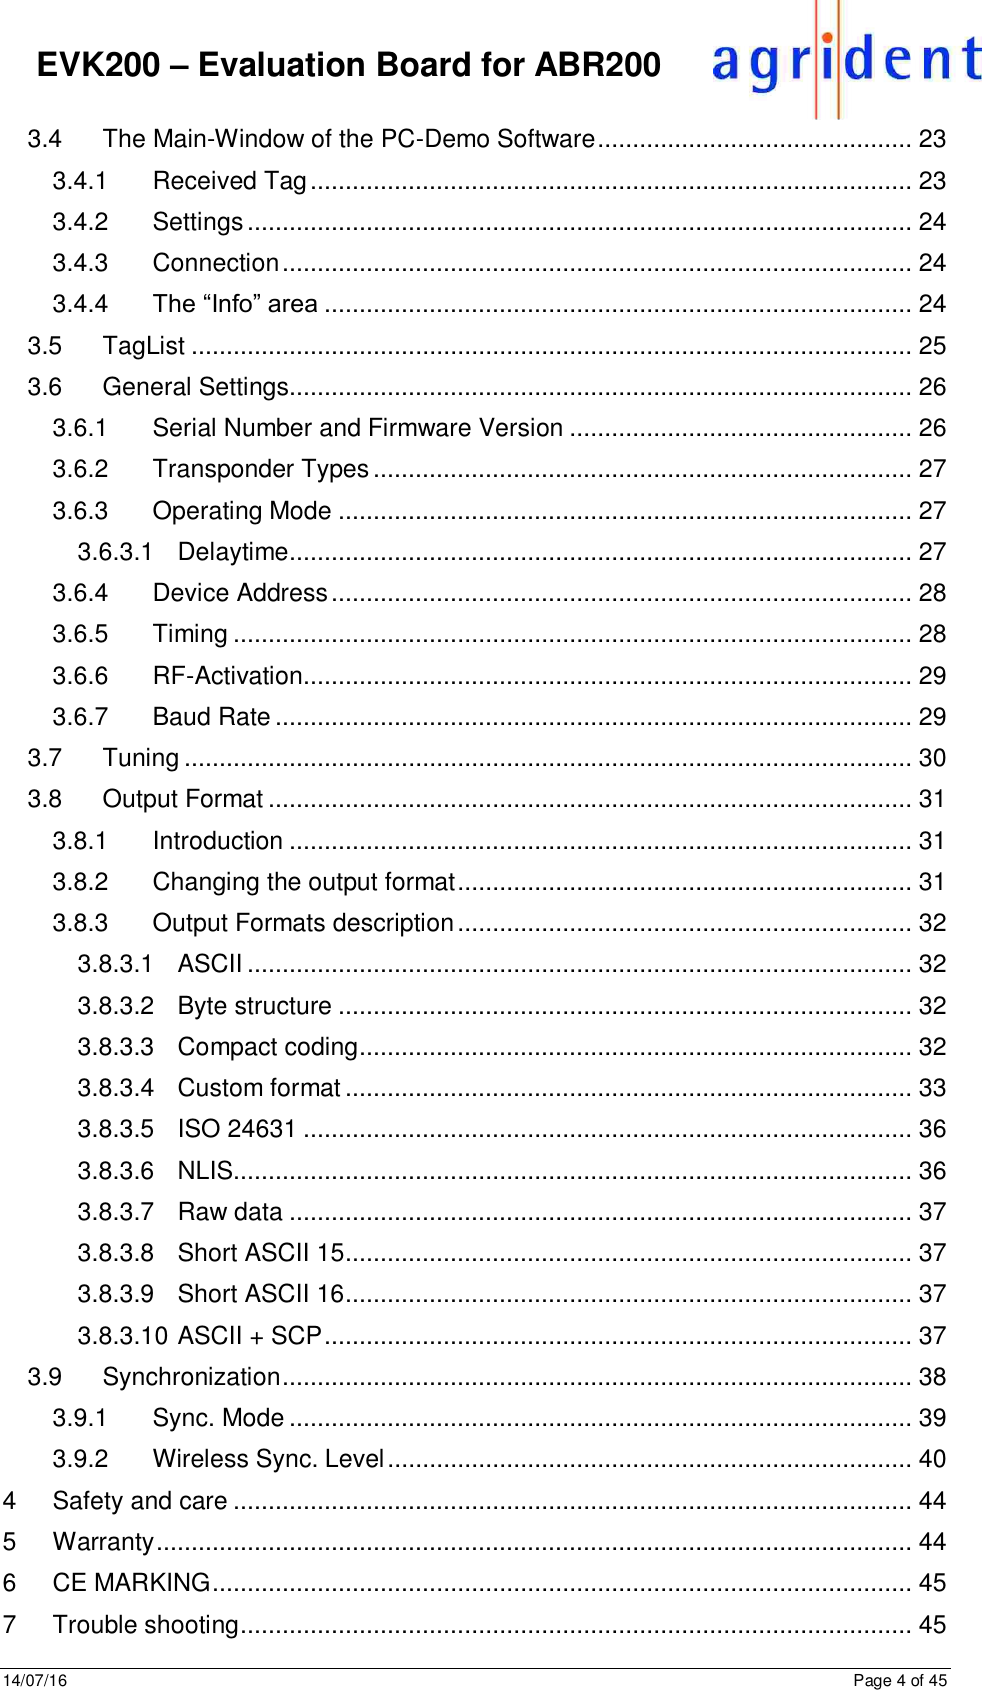 14/07/16      Page 4 of 45      EVK200 – Evaluation Board for ABR200 3.4 The Main-Window of the PC-Demo Software ............................................. 23 3.4.1 Received Tag ...................................................................................... 23 3.4.2 Settings ............................................................................................... 24 3.4.3 Connection .......................................................................................... 24 3.4.4 The “Info” area .................................................................................... 24 3.5 TagList ....................................................................................................... 25 3.6 General Settings ......................................................................................... 26 3.6.1 Serial Number and Firmware Version ................................................. 26 3.6.2 Transponder Types ............................................................................. 27 3.6.3 Operating Mode .................................................................................. 27 3.6.3.1 Delaytime ......................................................................................... 27 3.6.4 Device Address ................................................................................... 28 3.6.5 Timing ................................................................................................. 28 3.6.6 RF-Activation ....................................................................................... 29 3.6.7 Baud Rate ........................................................................................... 29 3.7 Tuning ........................................................................................................ 30 3.8 Output Format ............................................................................................ 31 3.8.1 Introduction ......................................................................................... 31 3.8.2 Changing the output format ................................................................. 31 3.8.3 Output Formats description ................................................................. 32 3.8.3.1 ASCII ............................................................................................... 32 3.8.3.2 Byte structure .................................................................................. 32 3.8.3.3 Compact coding ............................................................................... 32 3.8.3.4 Custom format ................................................................................. 33 3.8.3.5 ISO 24631 ....................................................................................... 36 3.8.3.6 NLIS................................................................................................. 36 3.8.3.7 Raw data ......................................................................................... 37 3.8.3.8 Short ASCII 15 ................................................................................. 37 3.8.3.9 Short ASCII 16 ................................................................................. 37 3.8.3.10 ASCII + SCP .................................................................................... 37 3.9 Synchronization .......................................................................................... 38 3.9.1 Sync. Mode ......................................................................................... 39 3.9.2 Wireless Sync. Level ........................................................................... 40 4 Safety and care ................................................................................................. 44 5 Warranty ............................................................................................................ 44 6 CE MARKING .................................................................................................... 45 7 Trouble shooting ................................................................................................ 45 